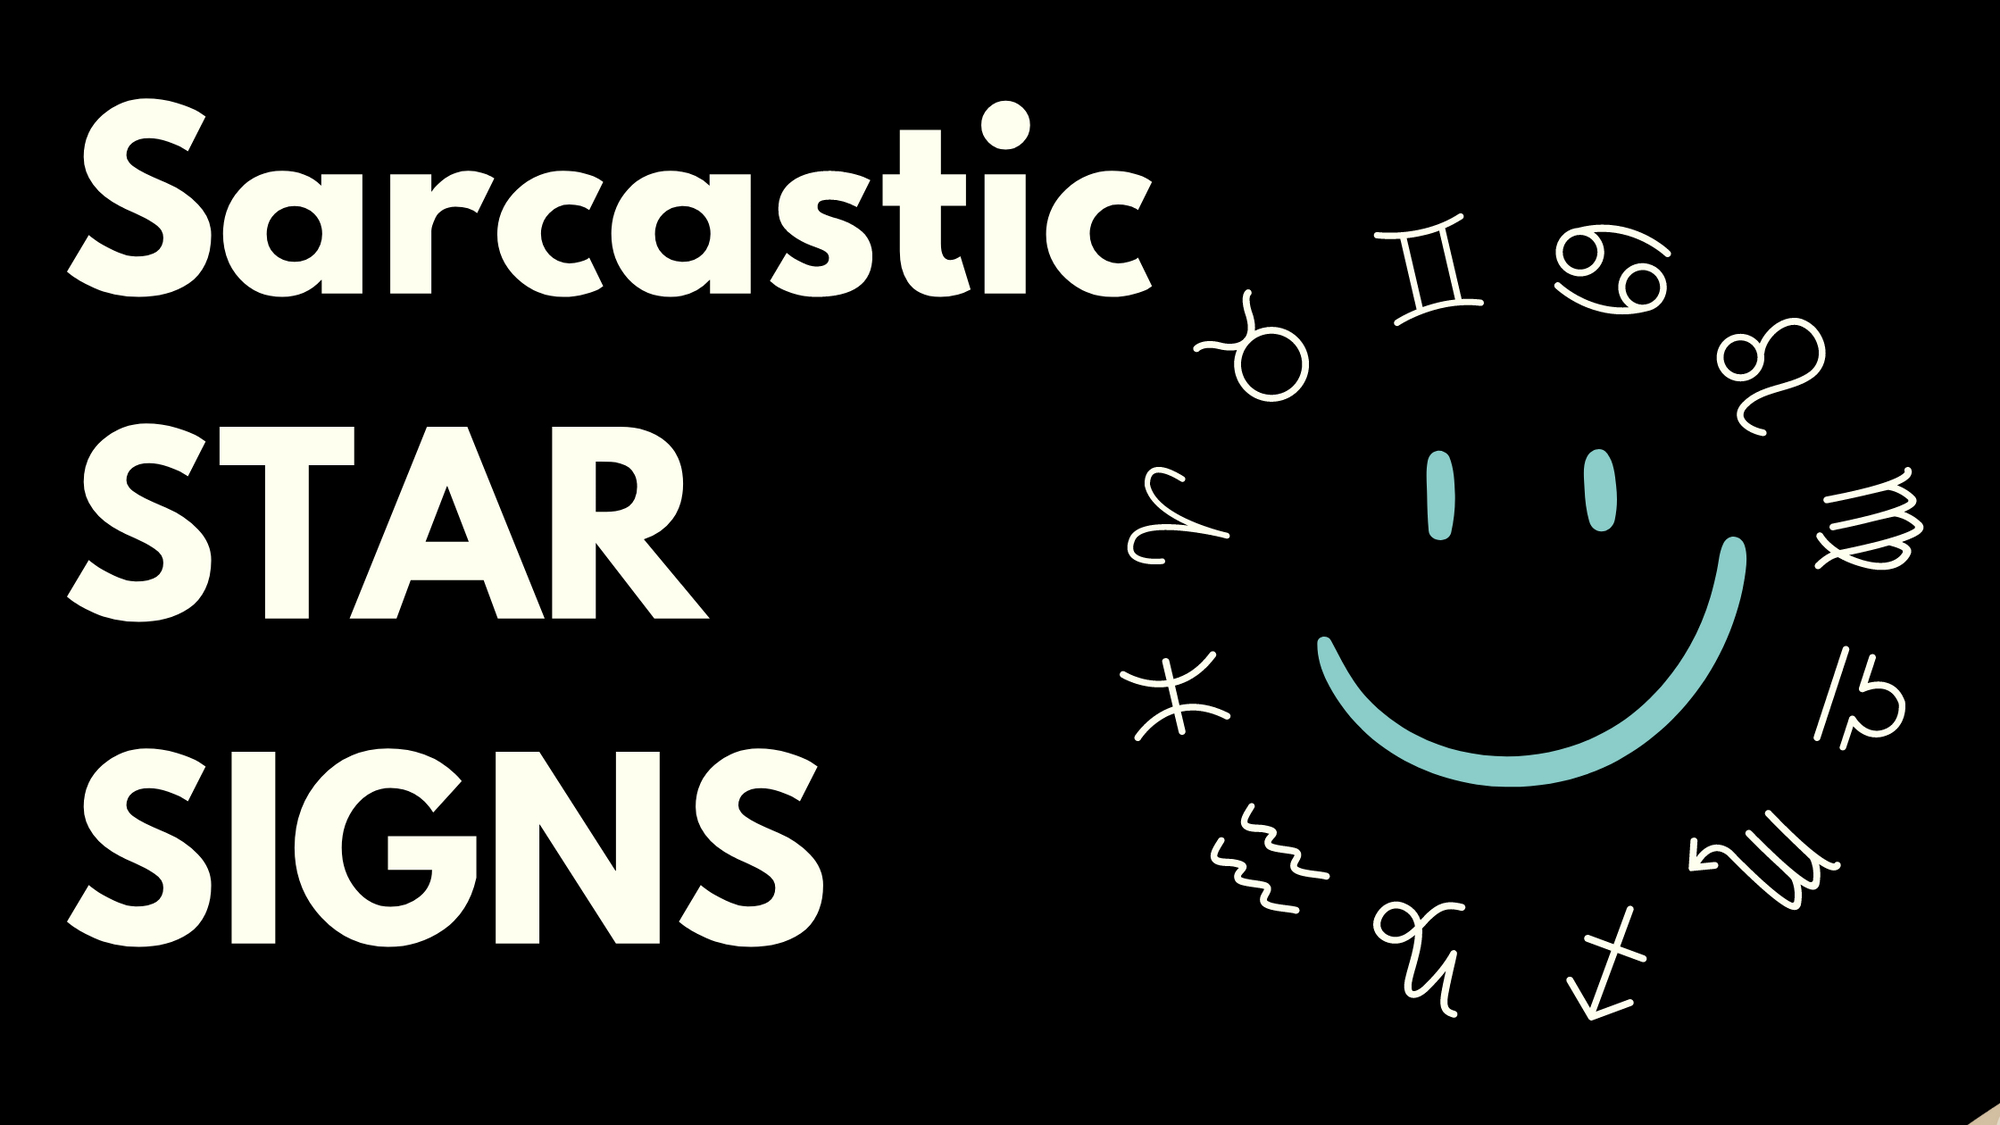 Sarcastic Star Signs.  Gift ideas for signs of the Zodiac